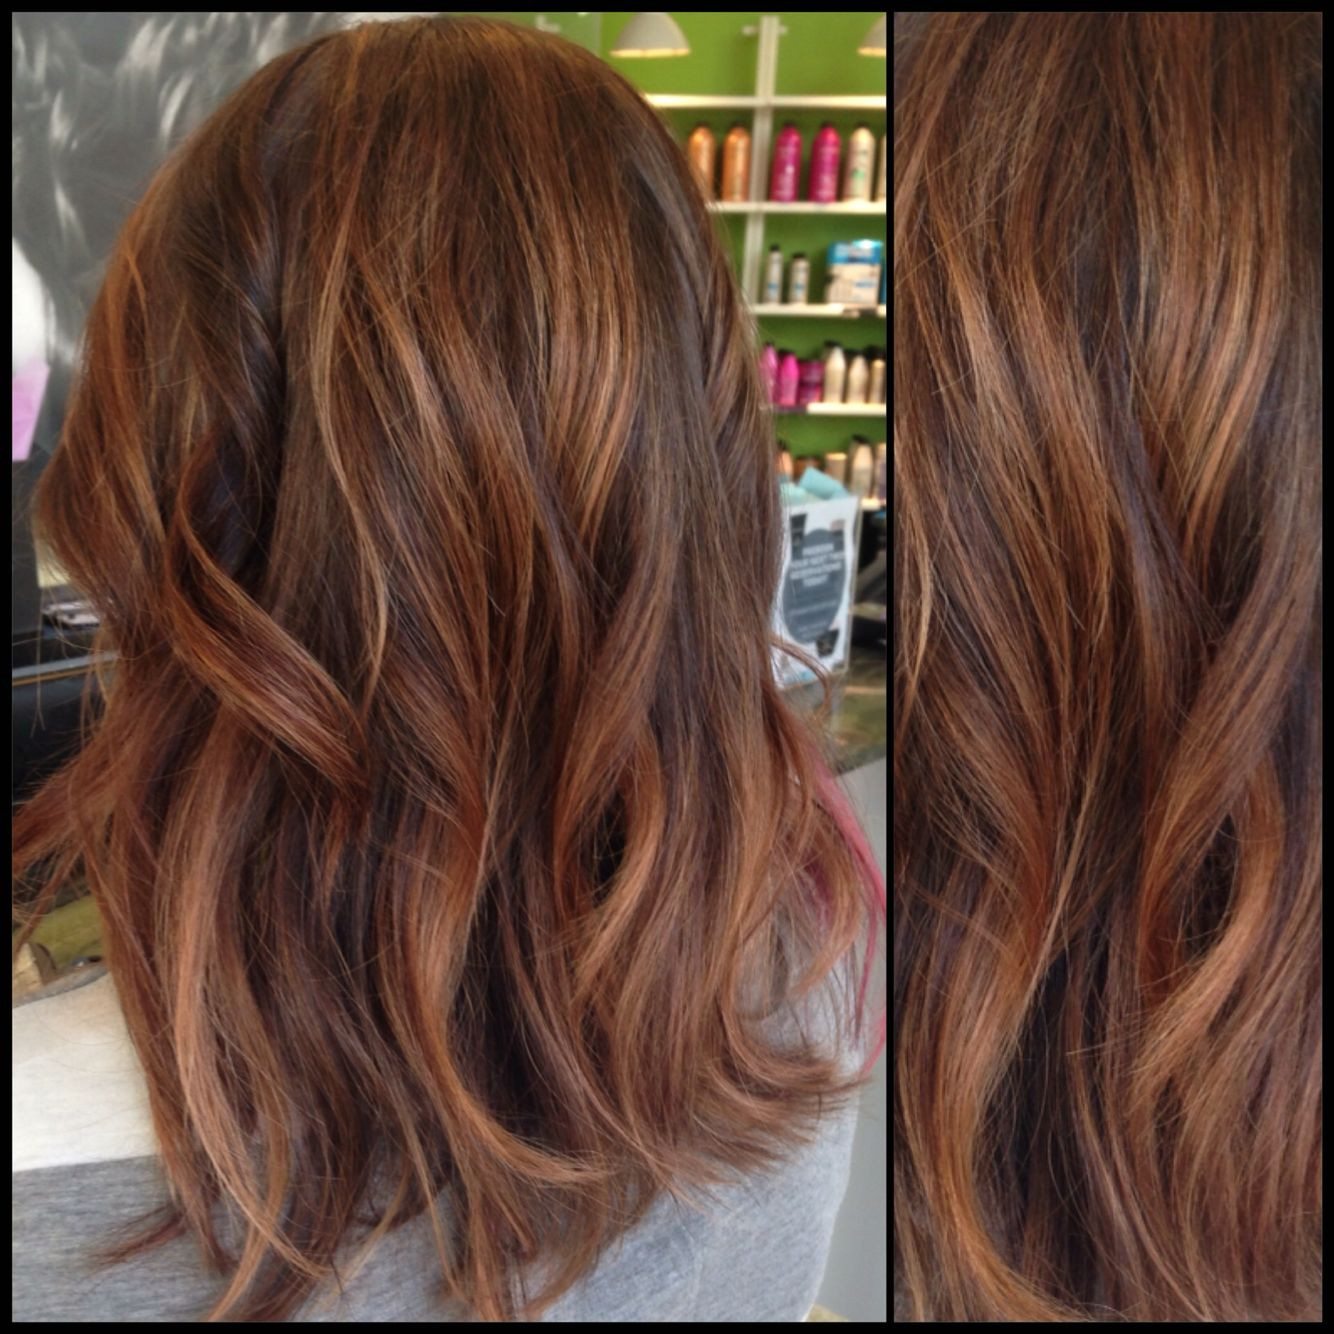 DIY Rose Brown Hair
 Caramel and brown hair with rose gold accents